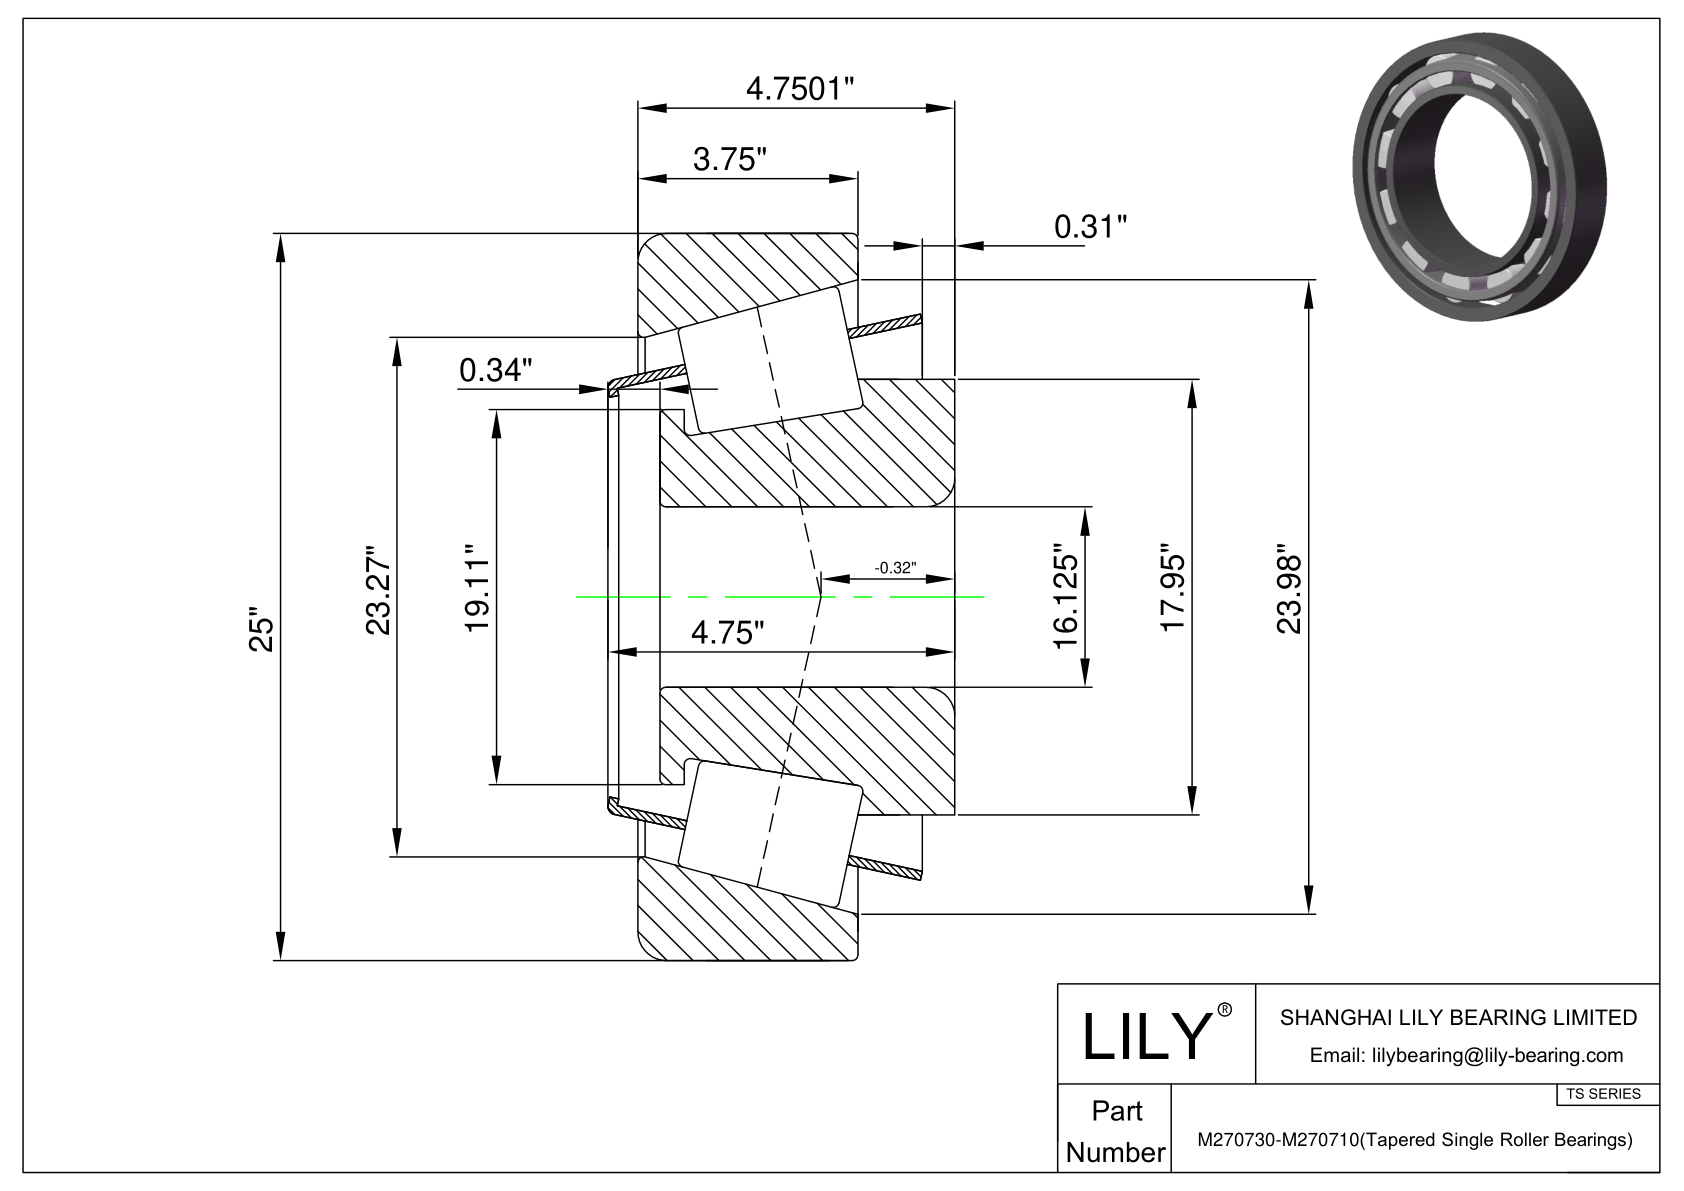 M270730-M270710 TS (Tapered Single Roller Bearings) (Imperial) cad drawing